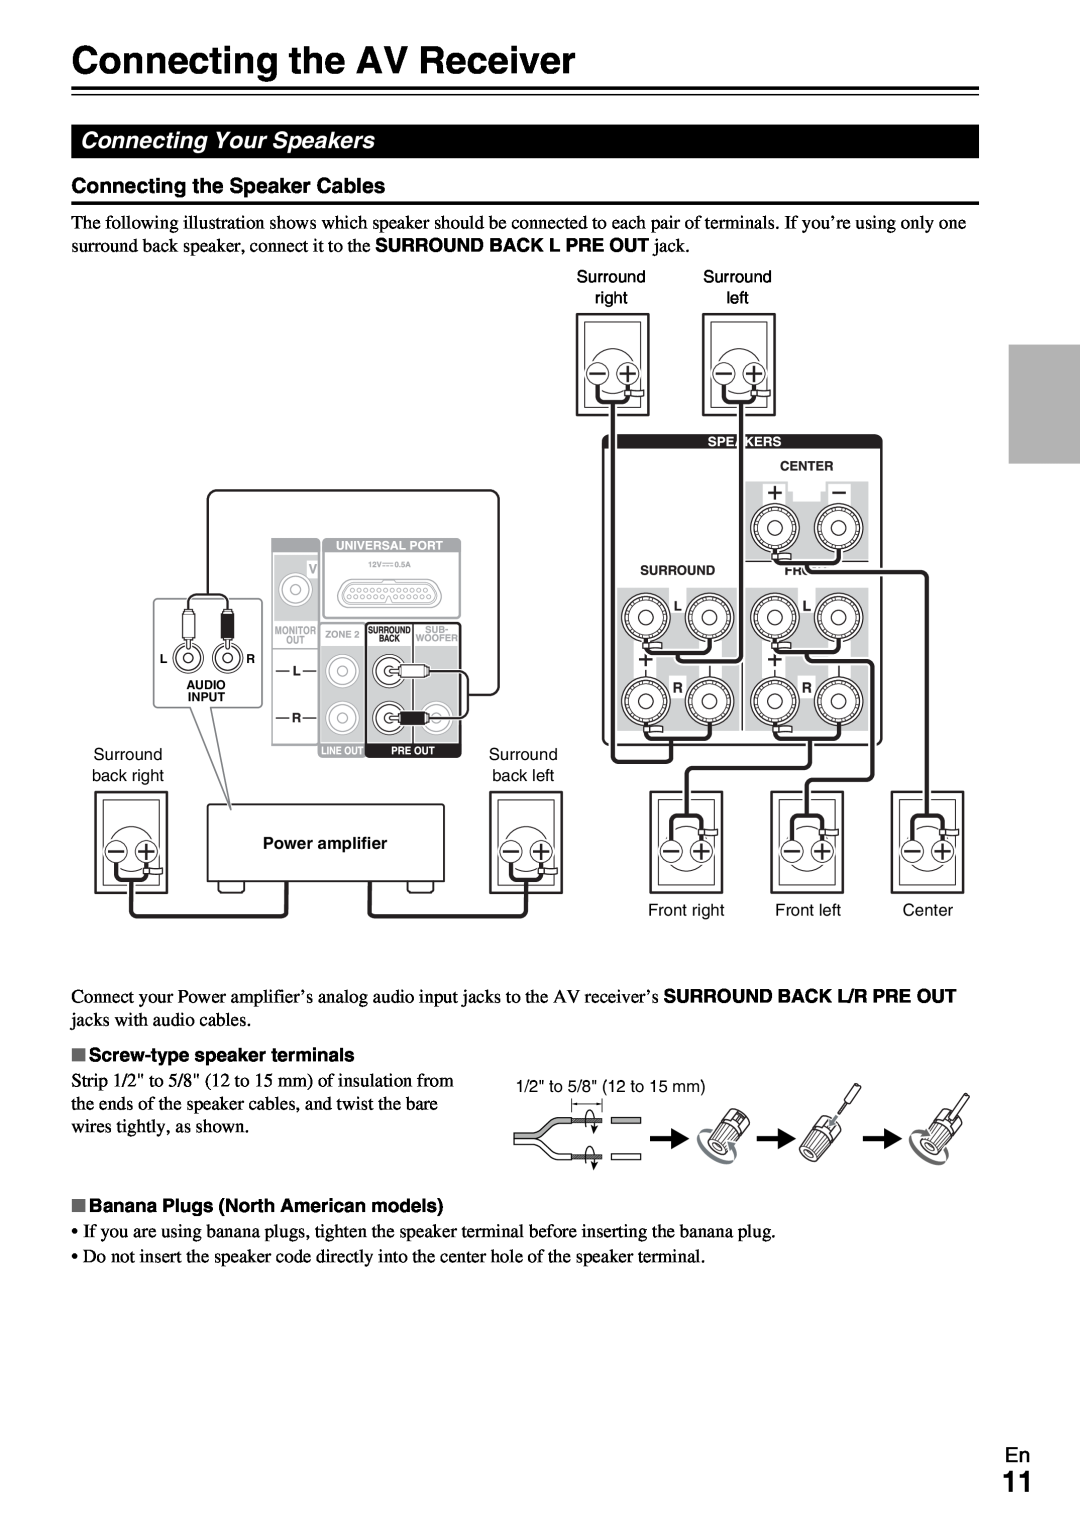 Onkyo TX-NR509 instruction manual Connecting the AV Receiver, Connecting Your Speakers, Connecting the Speaker Cables 